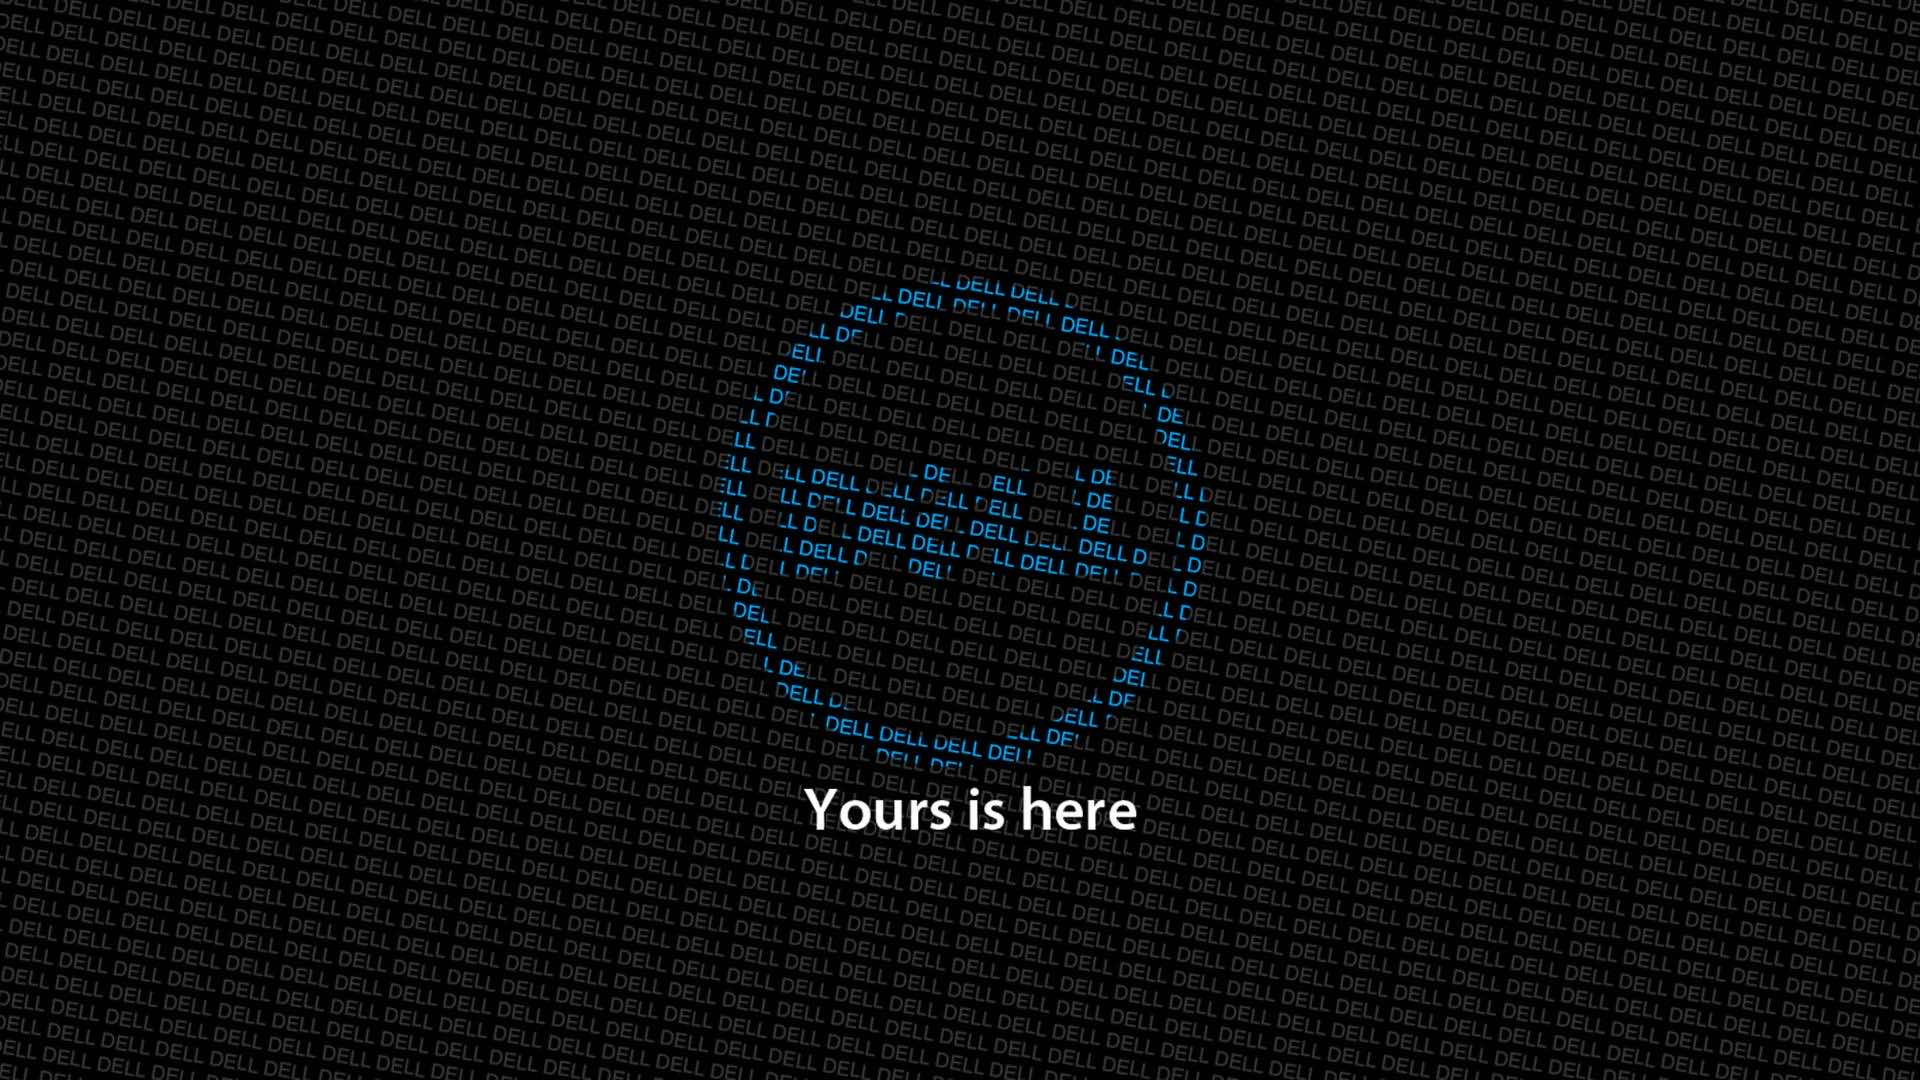 hd dell backgrounds & dell wallpaper images for